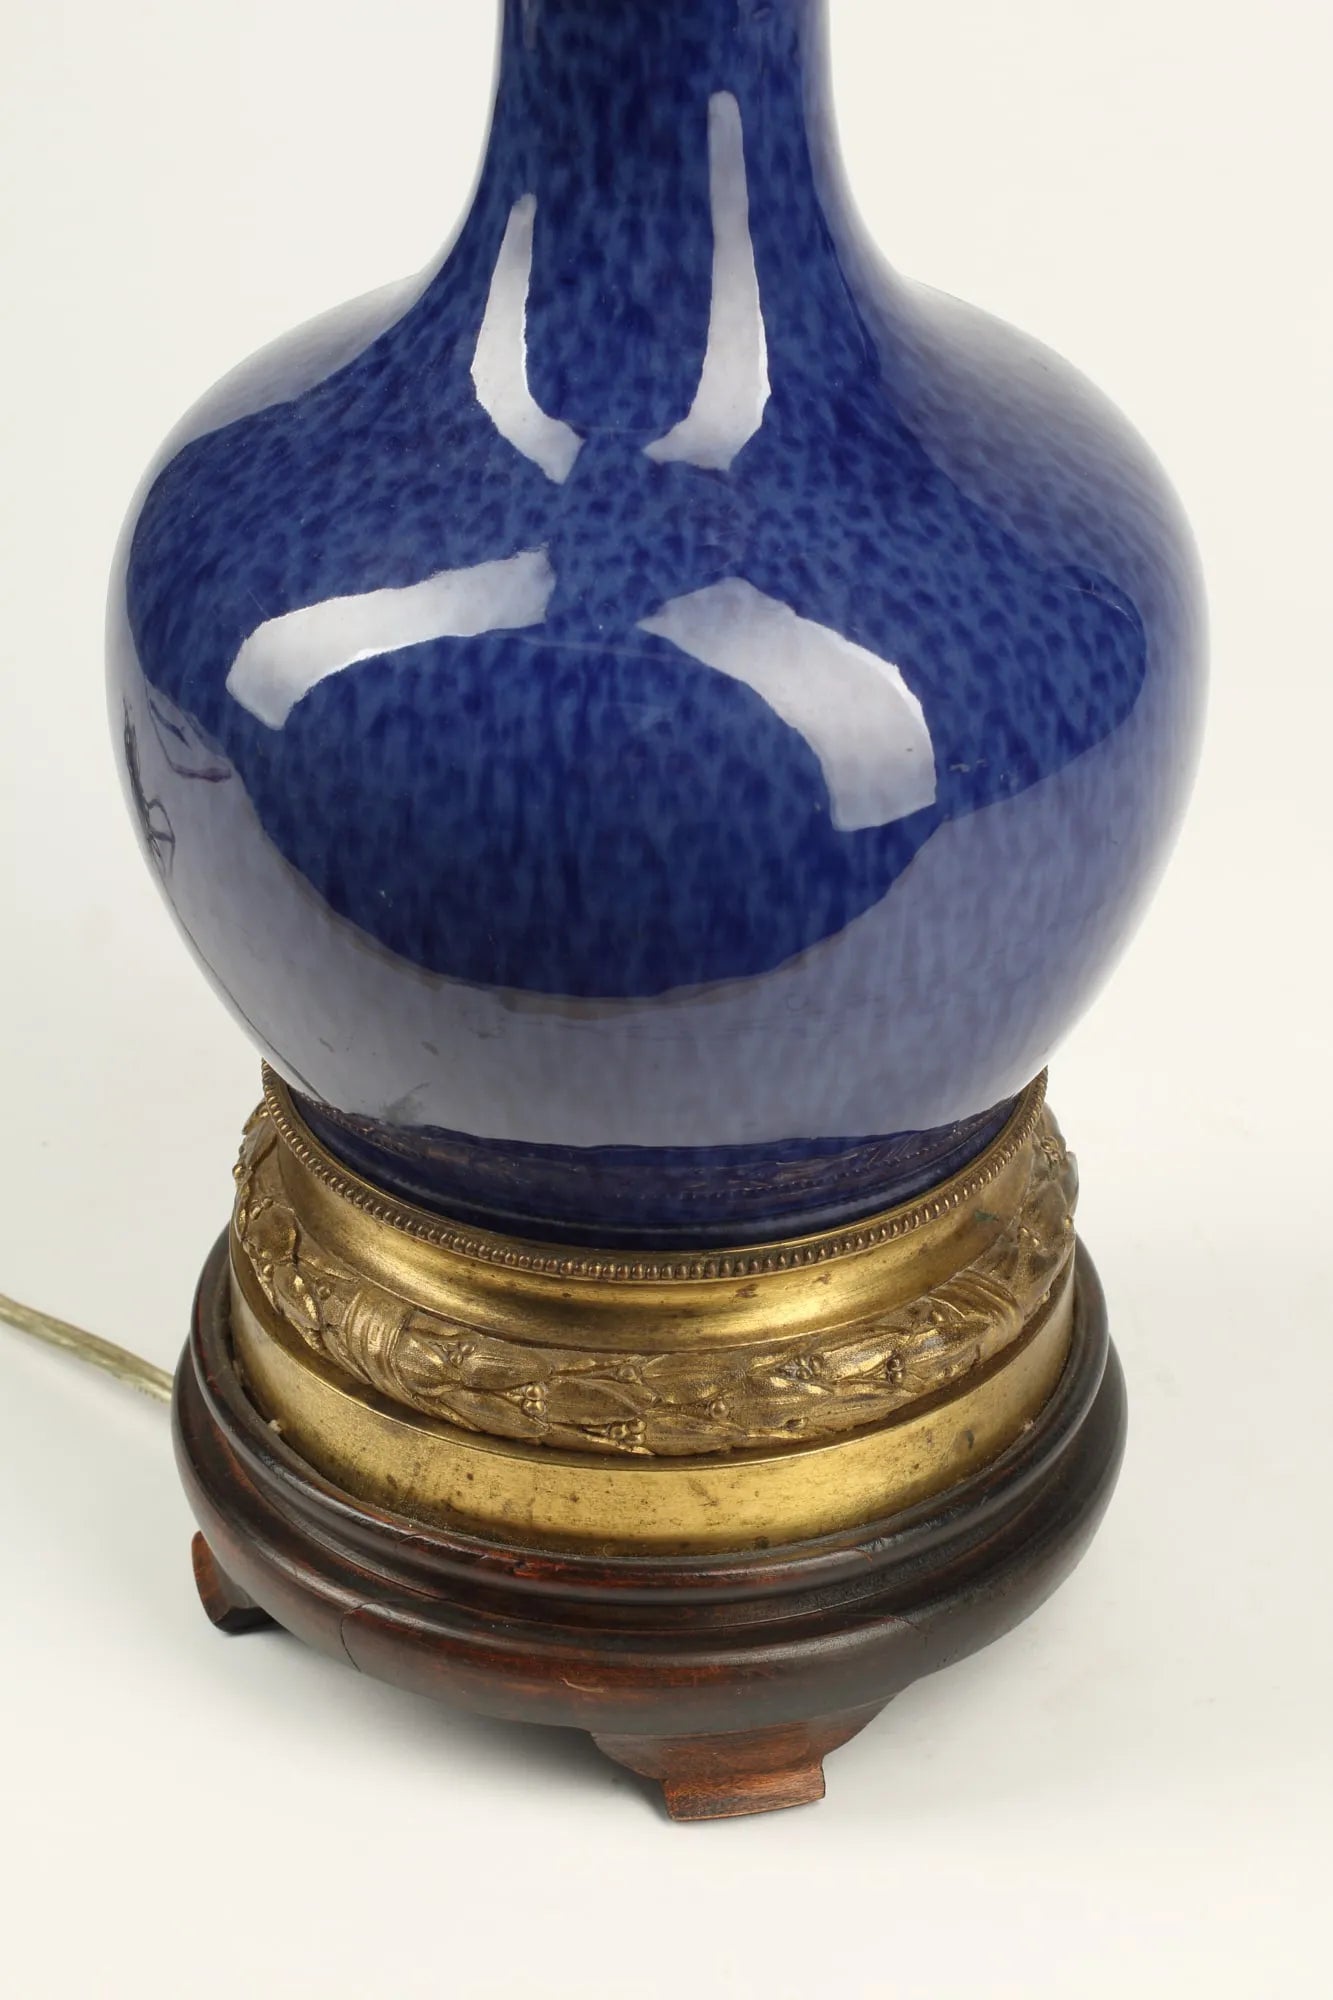 AL2-021: A Chinese Porcelain and Bronze Vase Mounted as a Lamp - Circa 1920